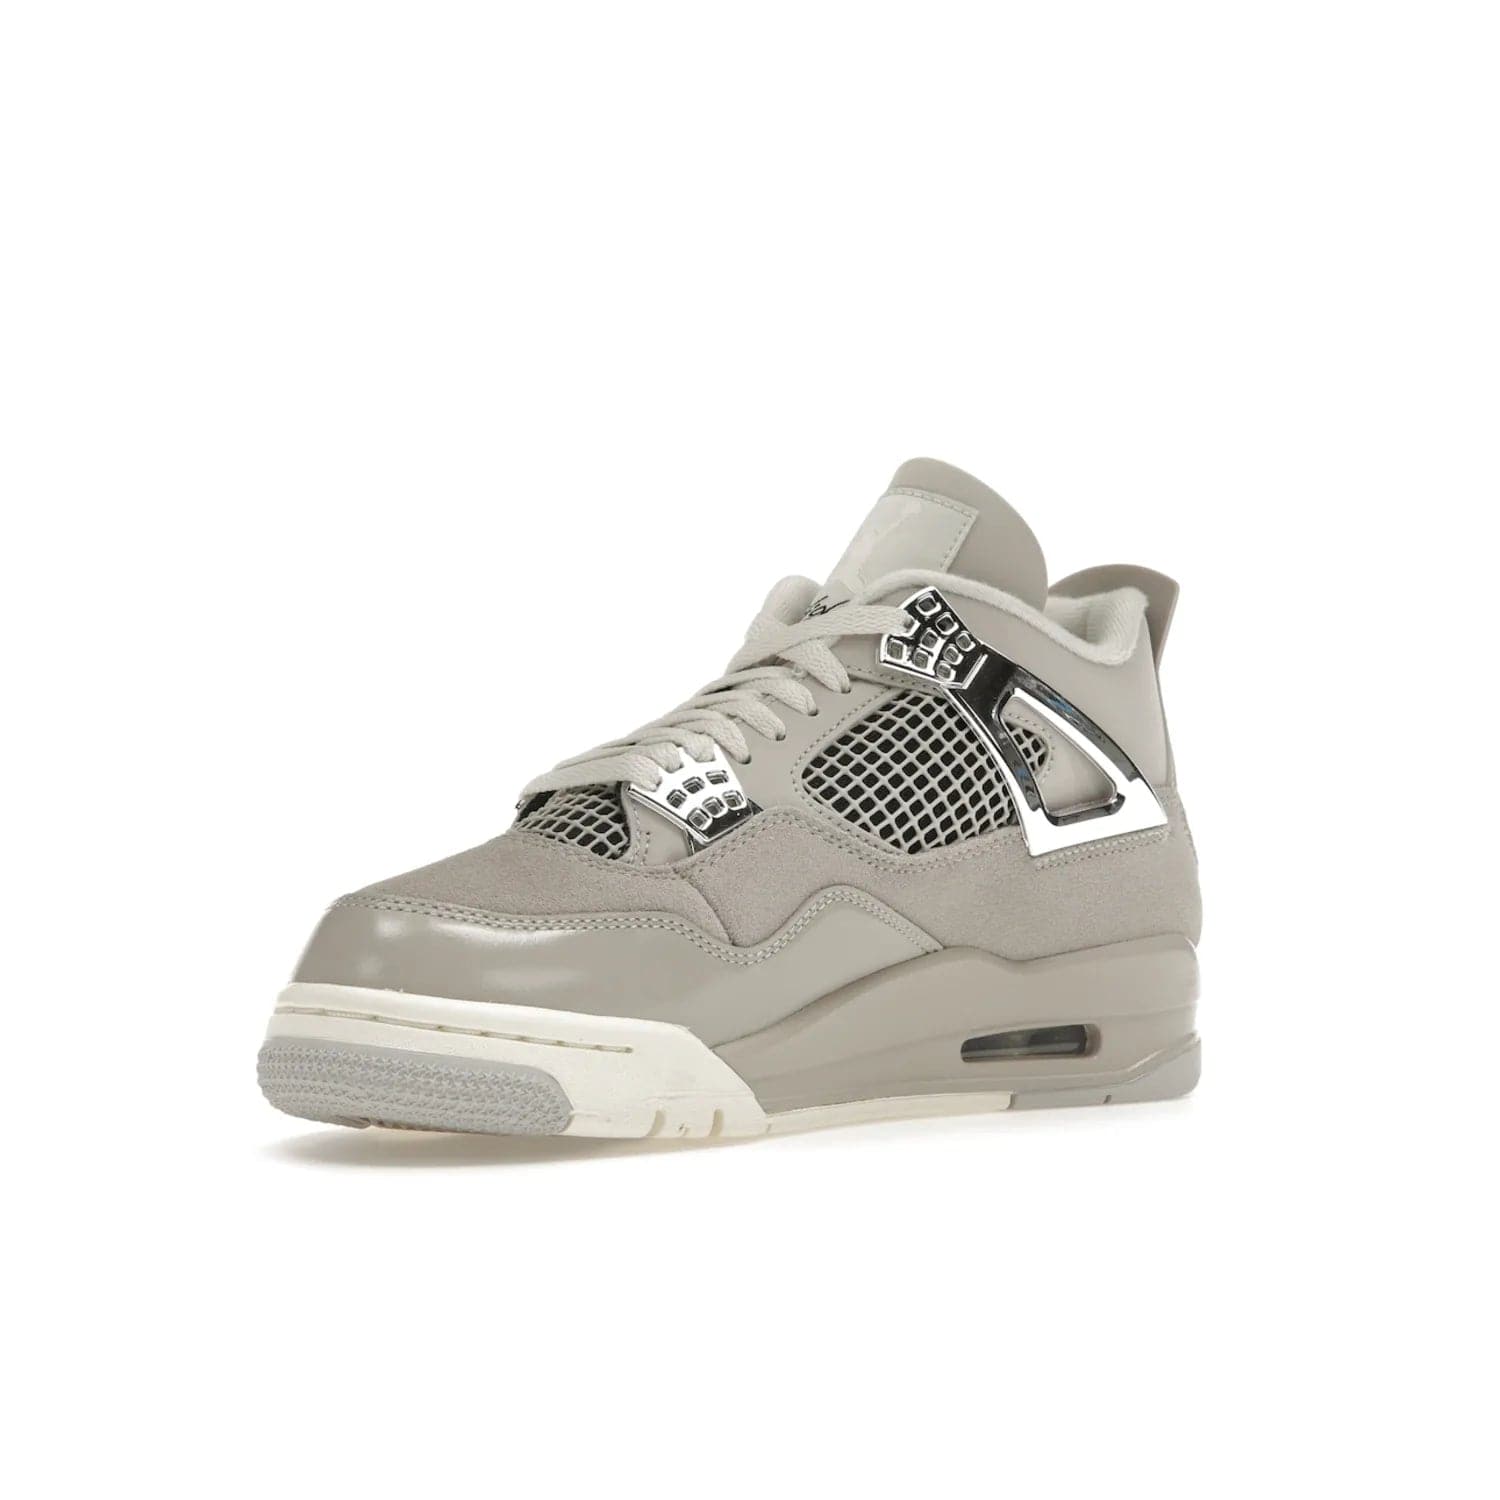 Jordan 4 Retro Frozen Moments (Women's) - Image 15 - Only at www.BallersClubKickz.com - The Jordan 4 Retro Frozen Moments is a stylish blend of classic design elements and modern tones. Featuring suede and leather overlays in a light iron-ore, sail, neutral grey, black, and metallic silver colorway. Get this iconic high-performance sneaker for $210.